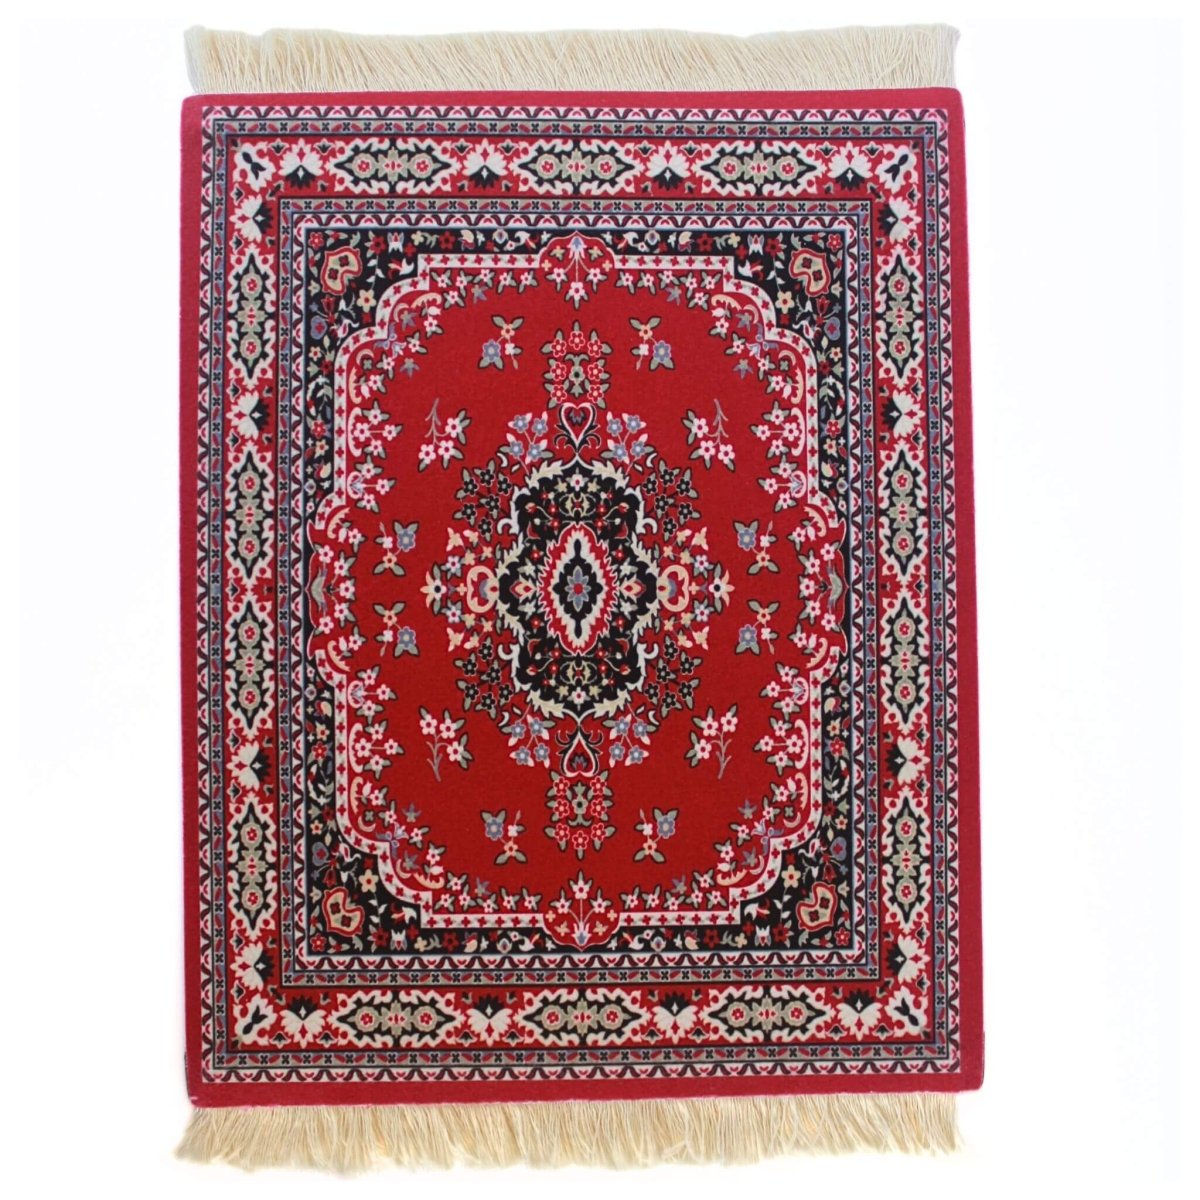 Red Persian carpet style computer mouse pad